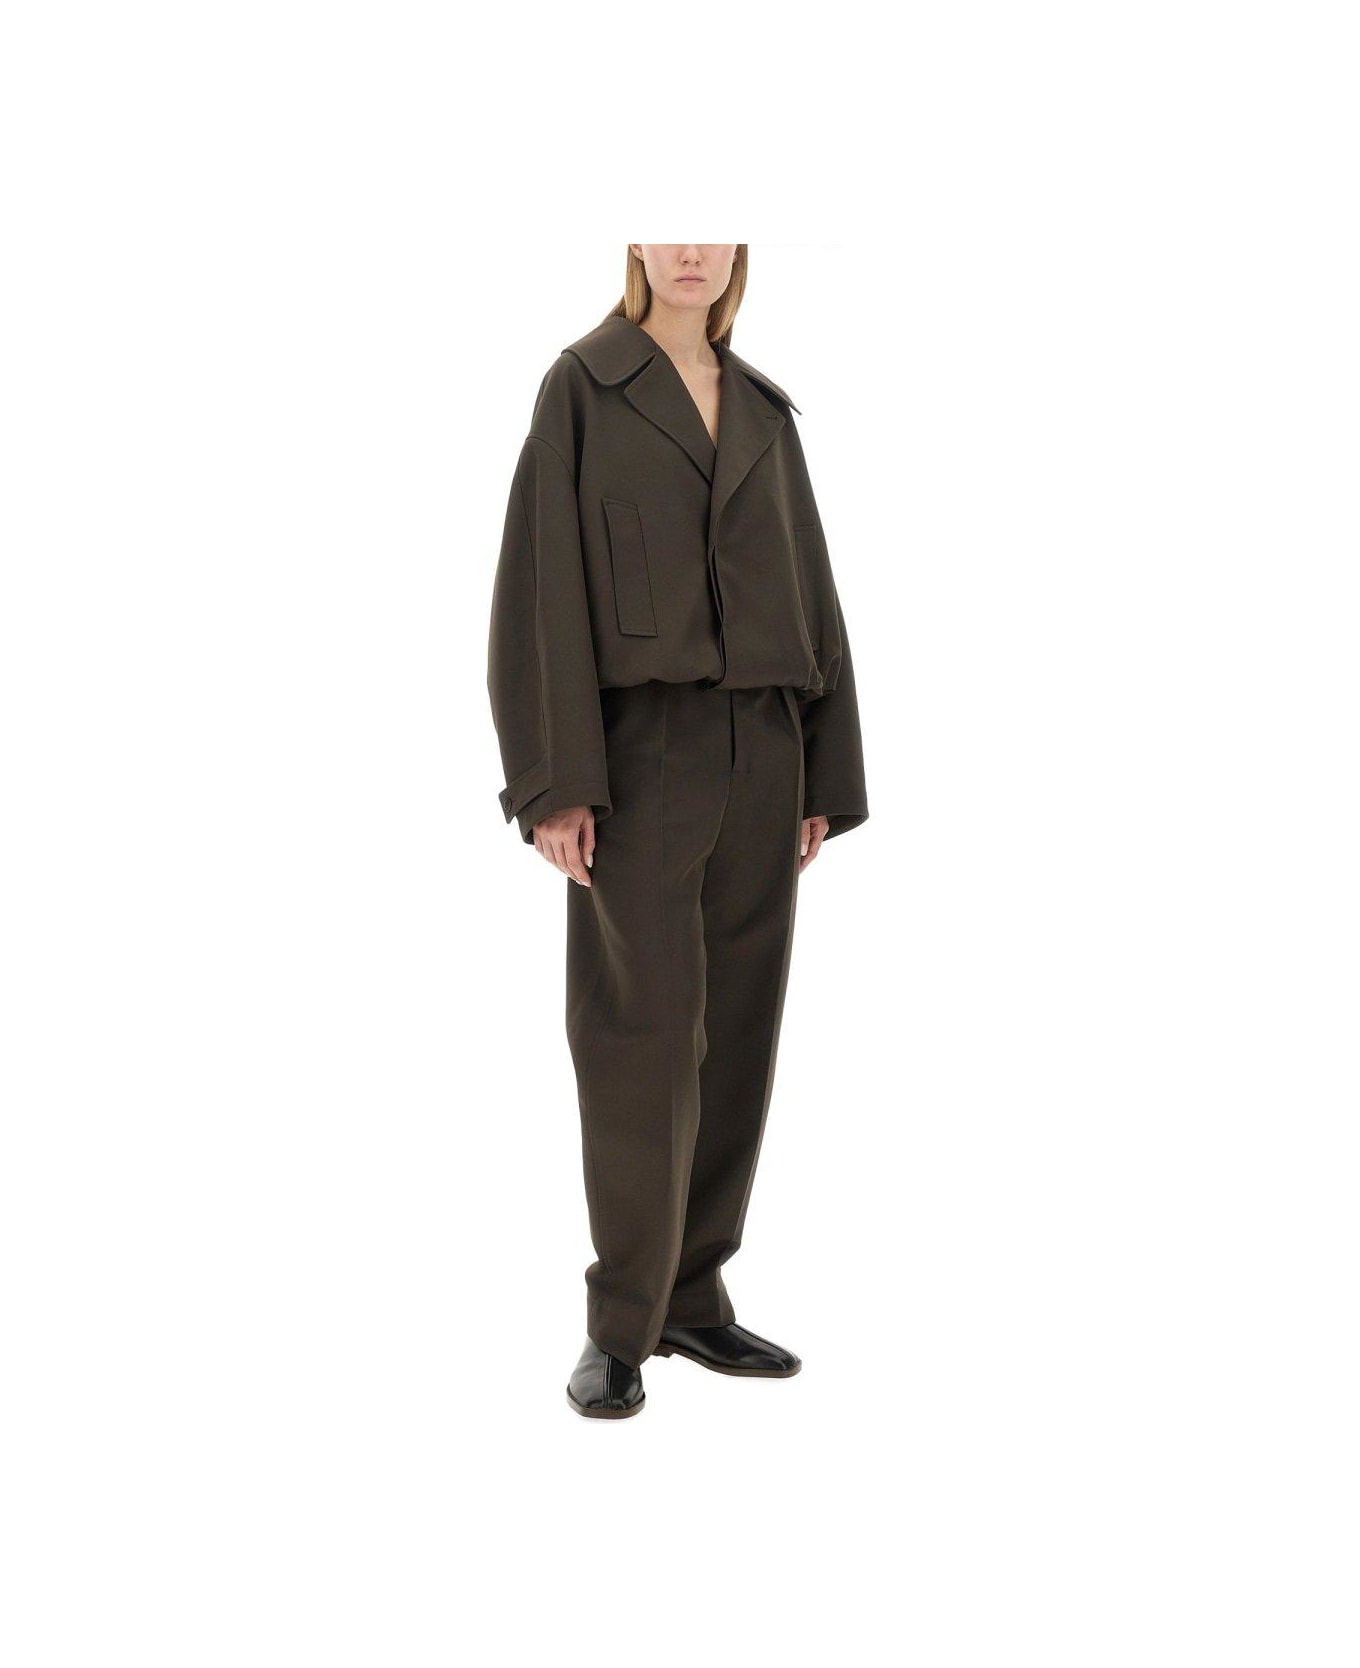 Lemaire Tailored Straight Leg Trousers - BROWN